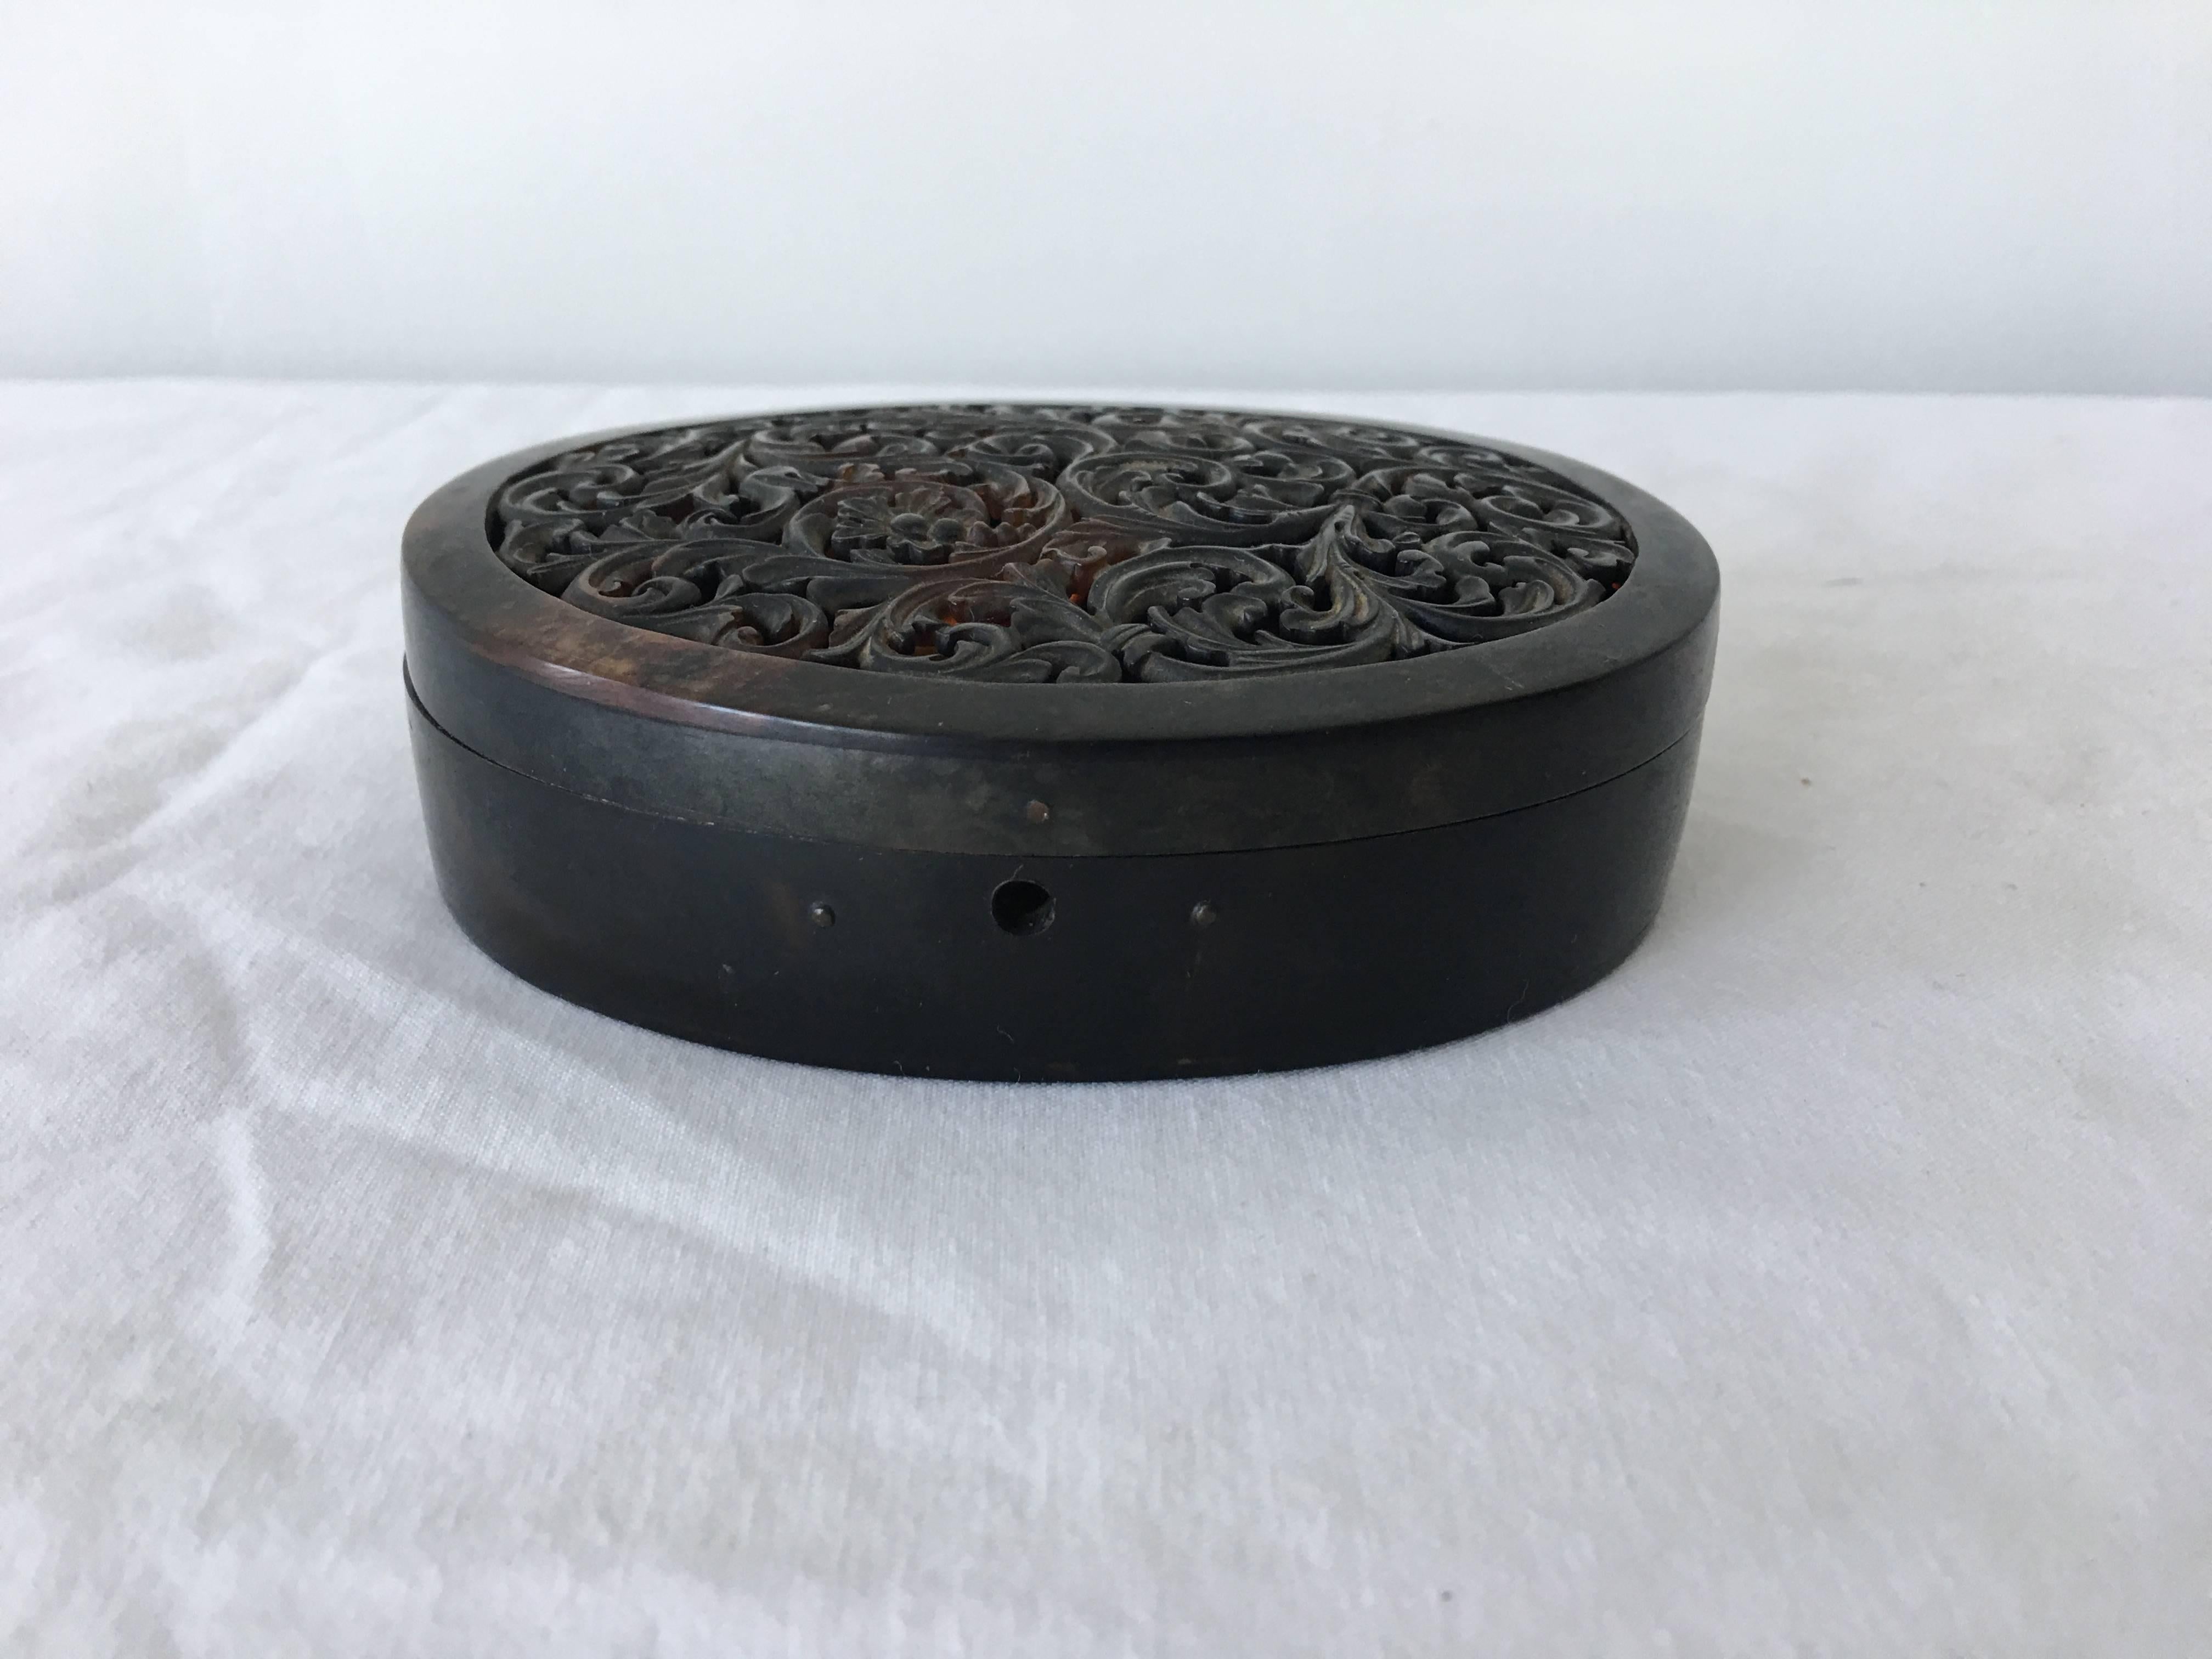 Victorian 19th Century Tortoise Shell Decorative Box with Pierced Floral Motif